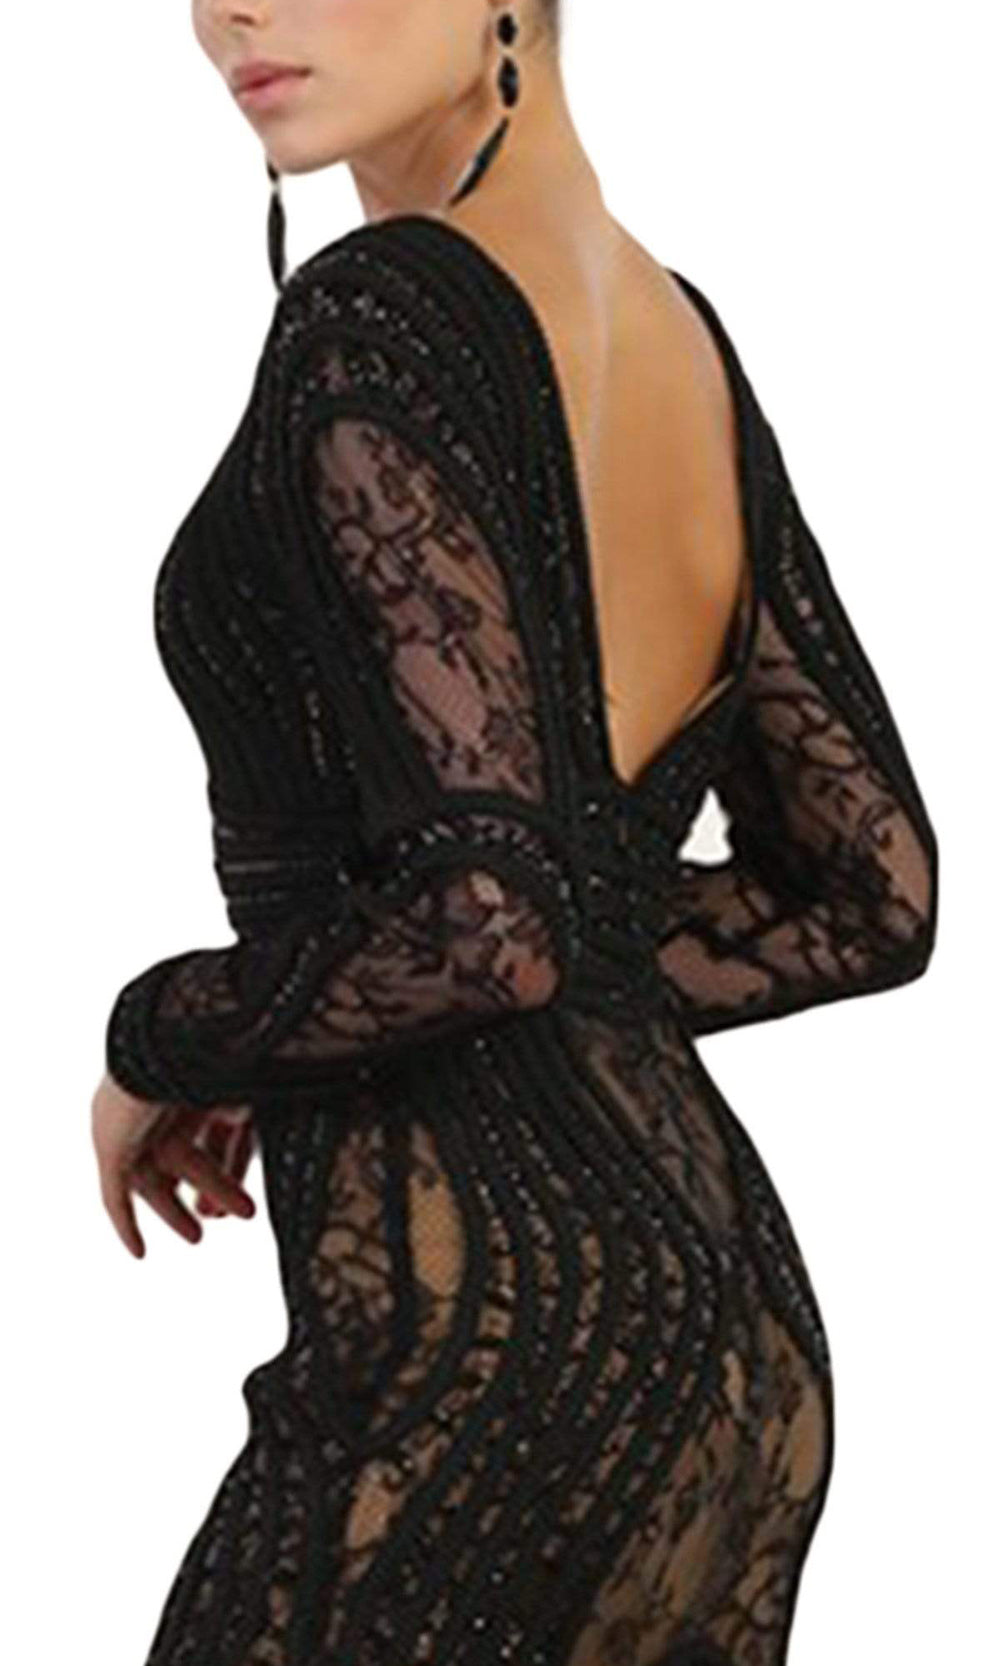 May Queen - Lace Embellished Bateau Mermaid Gown RQ7515 - 1 pc Black In Size 8 Available CCSALE 8 / Black